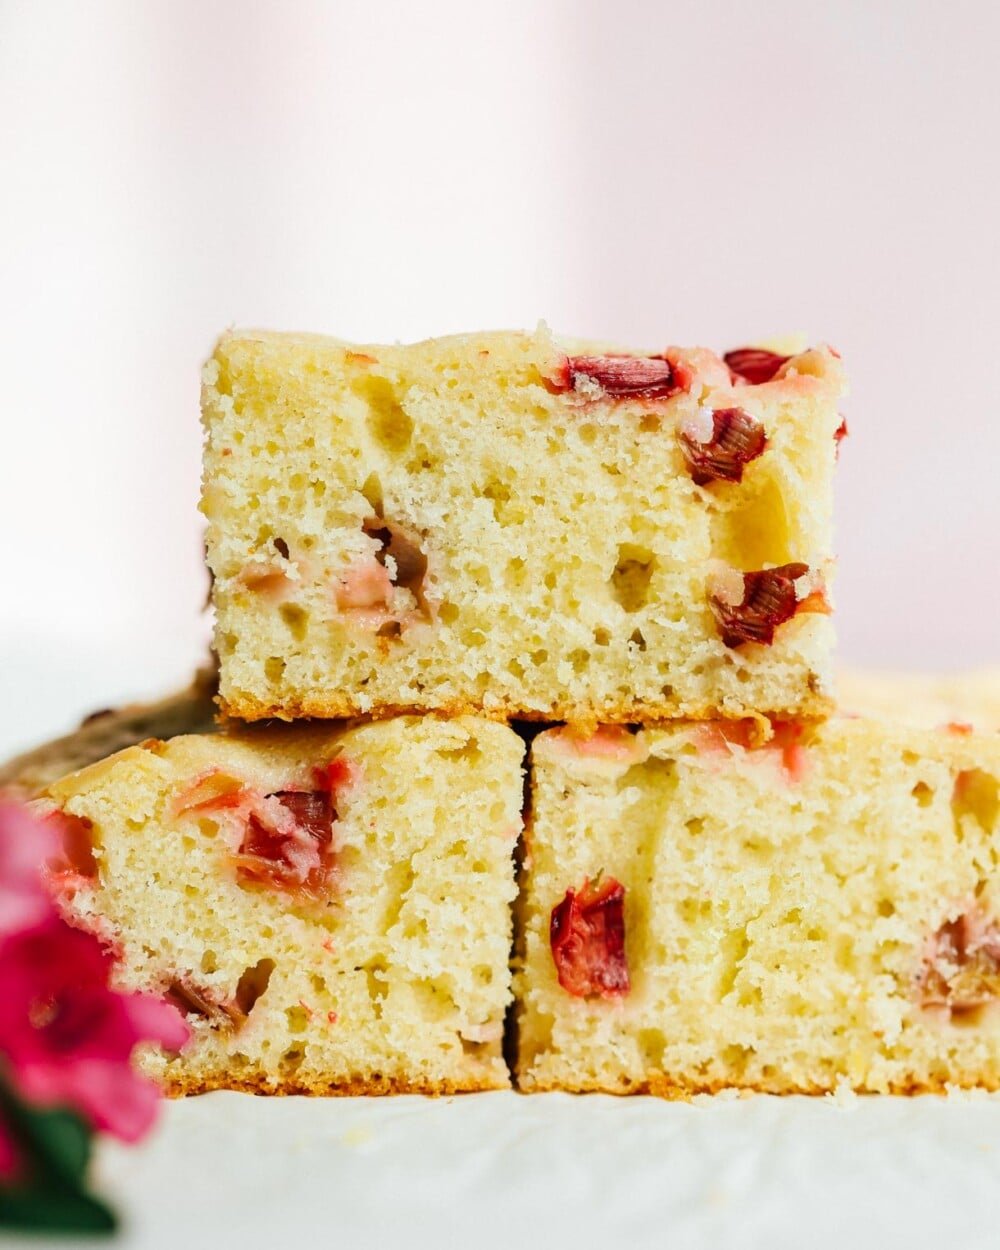 rhubarb cake slices stacked on one another